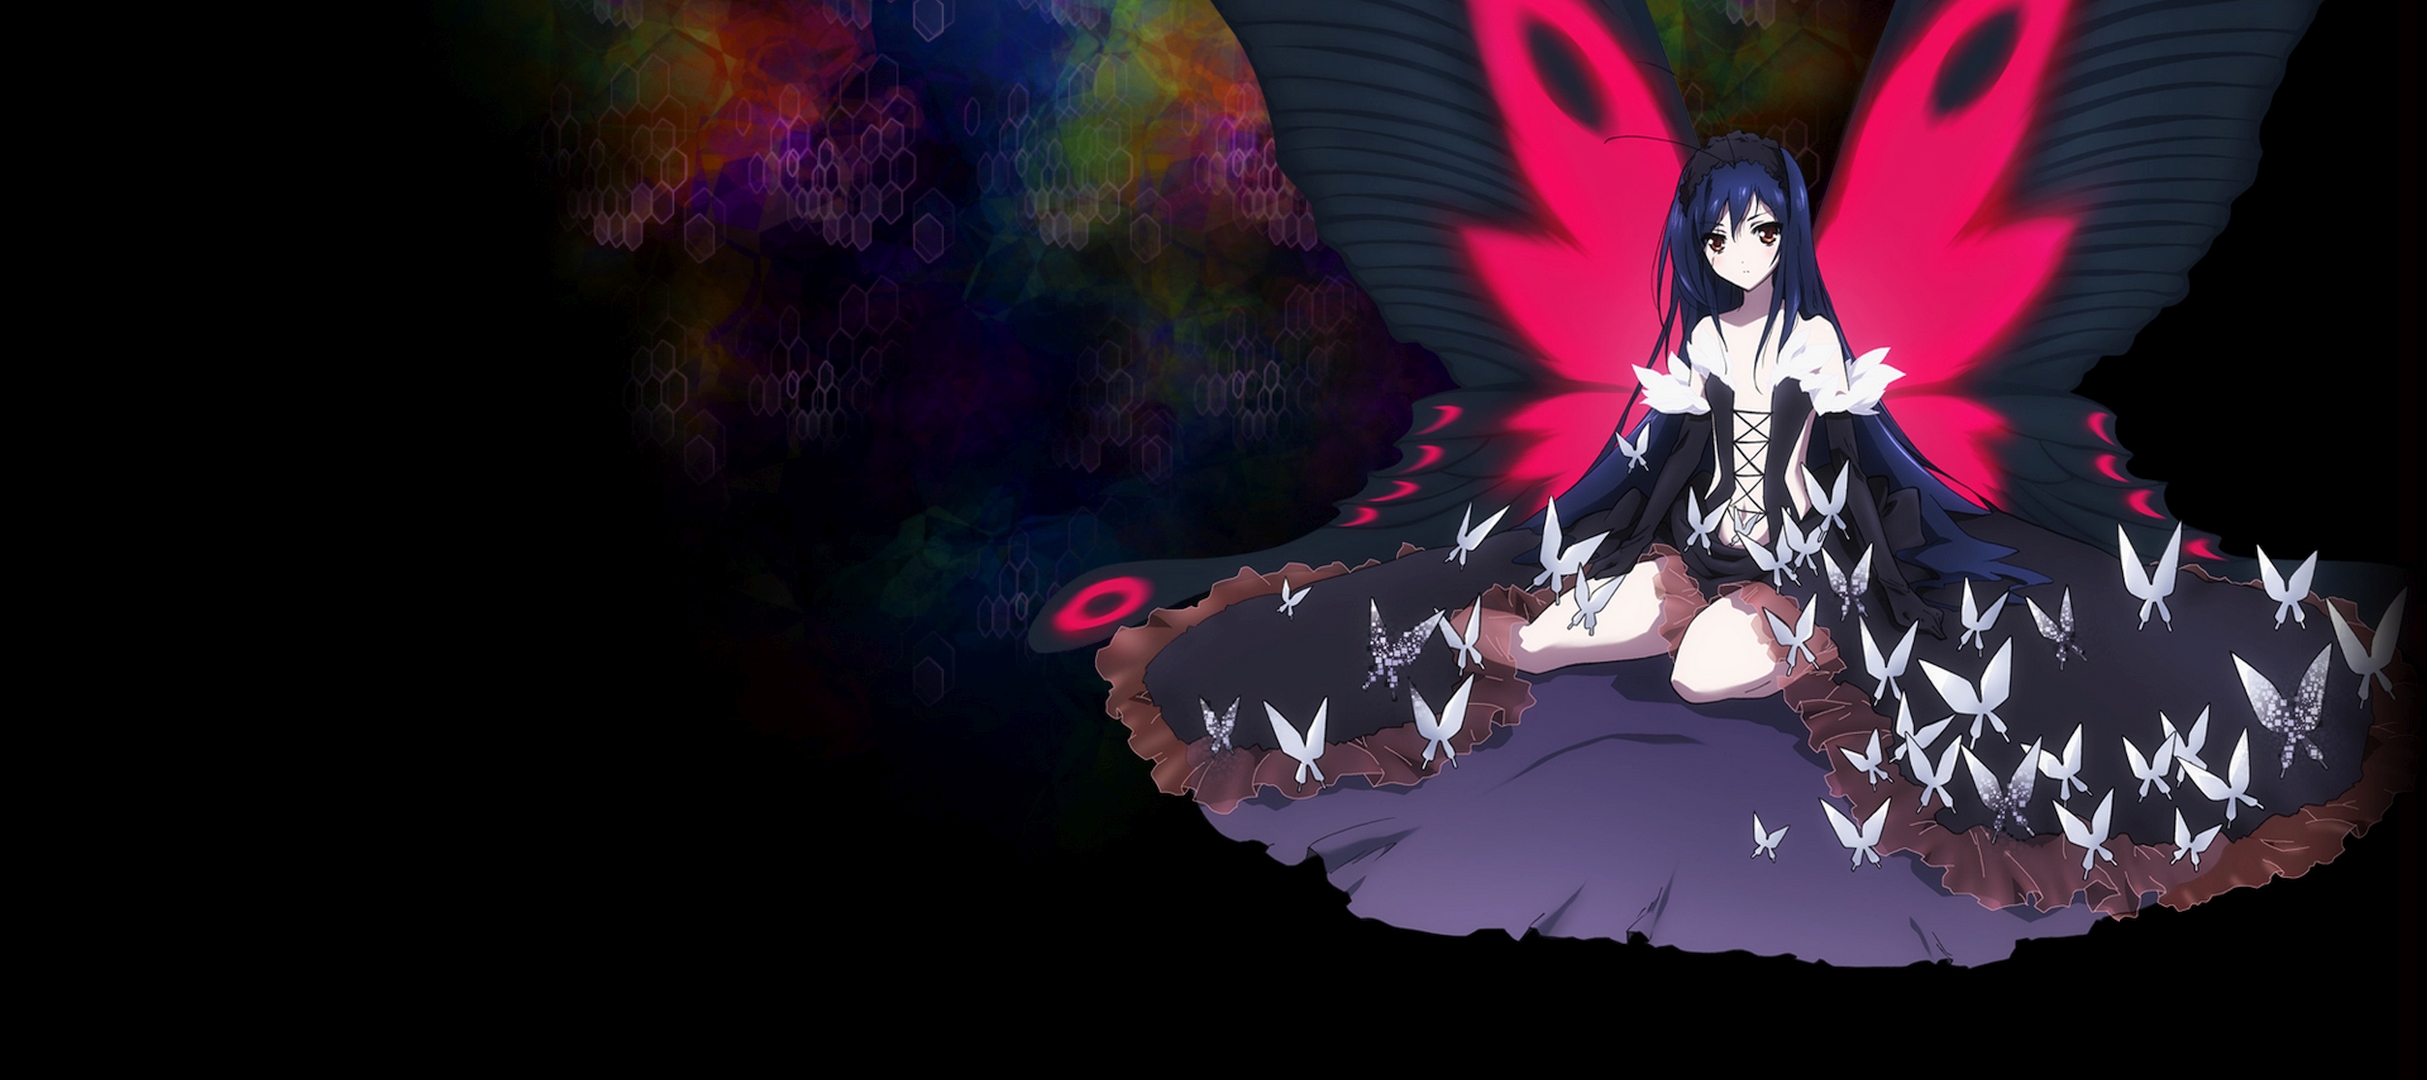 Anime Accel World HD Wallpaper | Background Image